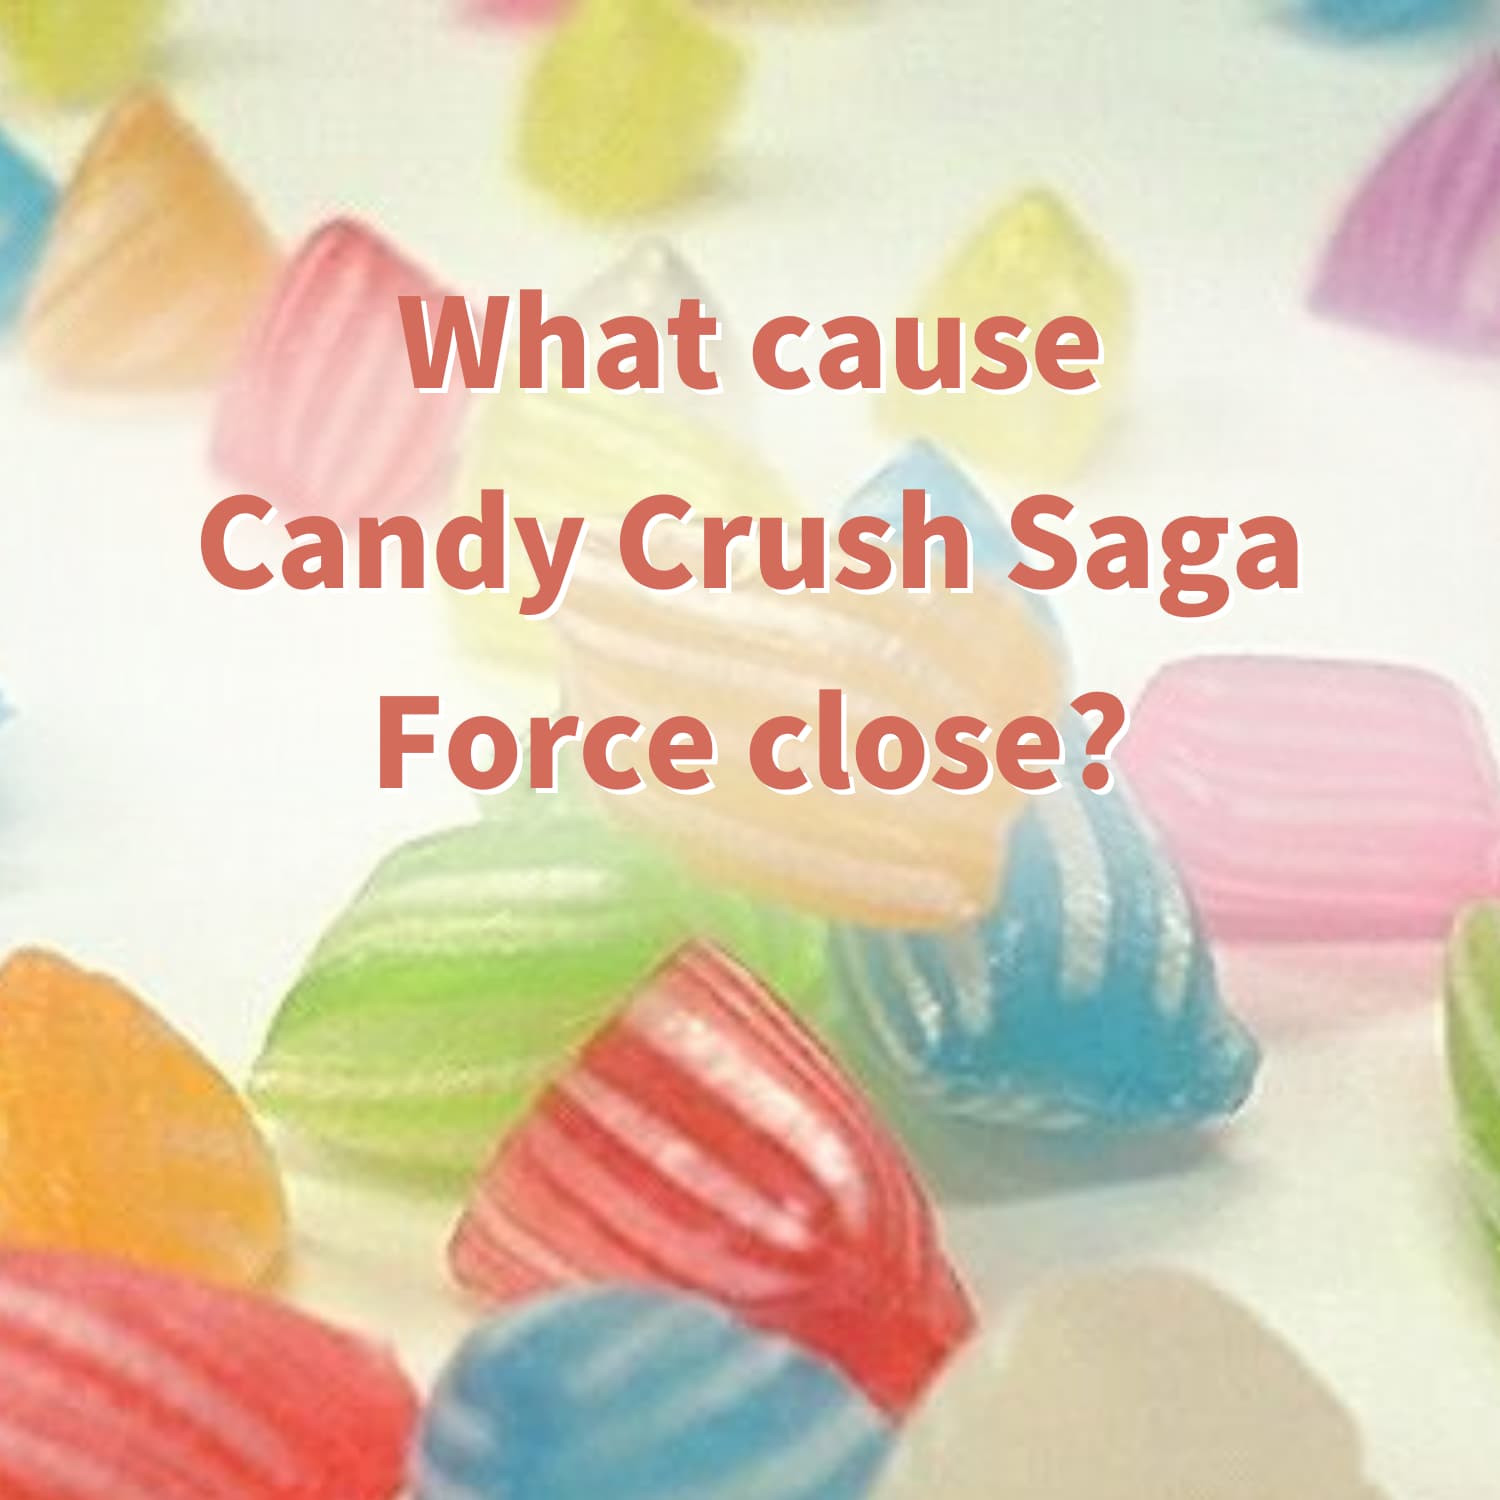 What causes Candy Crush Saga(CandyCrushSaga) to force close and what can I do about it? #CandyCrushSaga